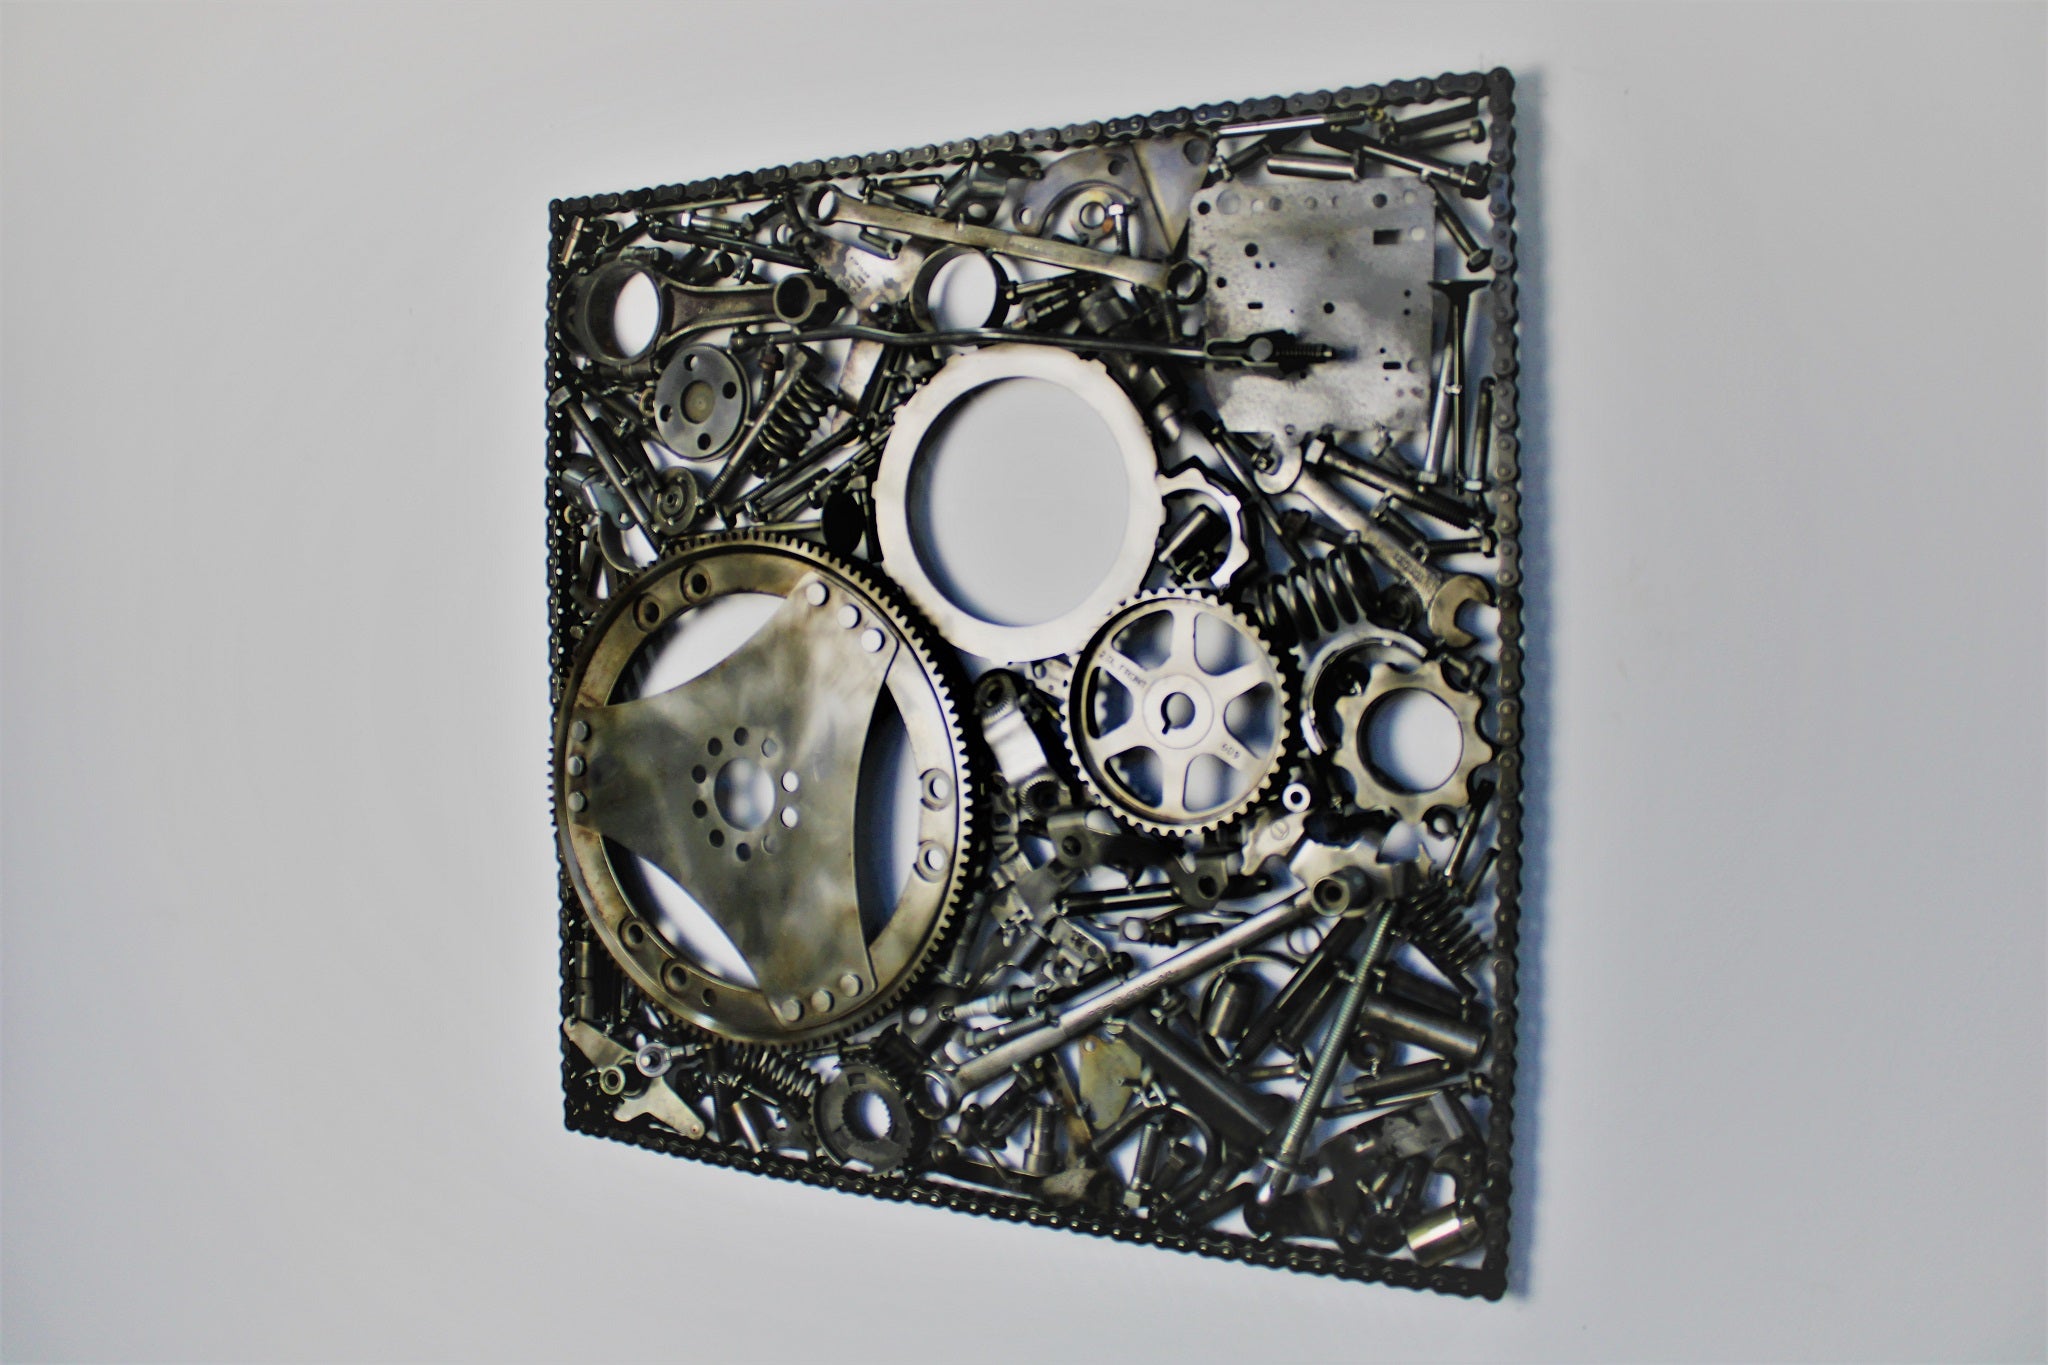 Automotive wall art made out of real car parts, 24 by 24 inch square wall hanging